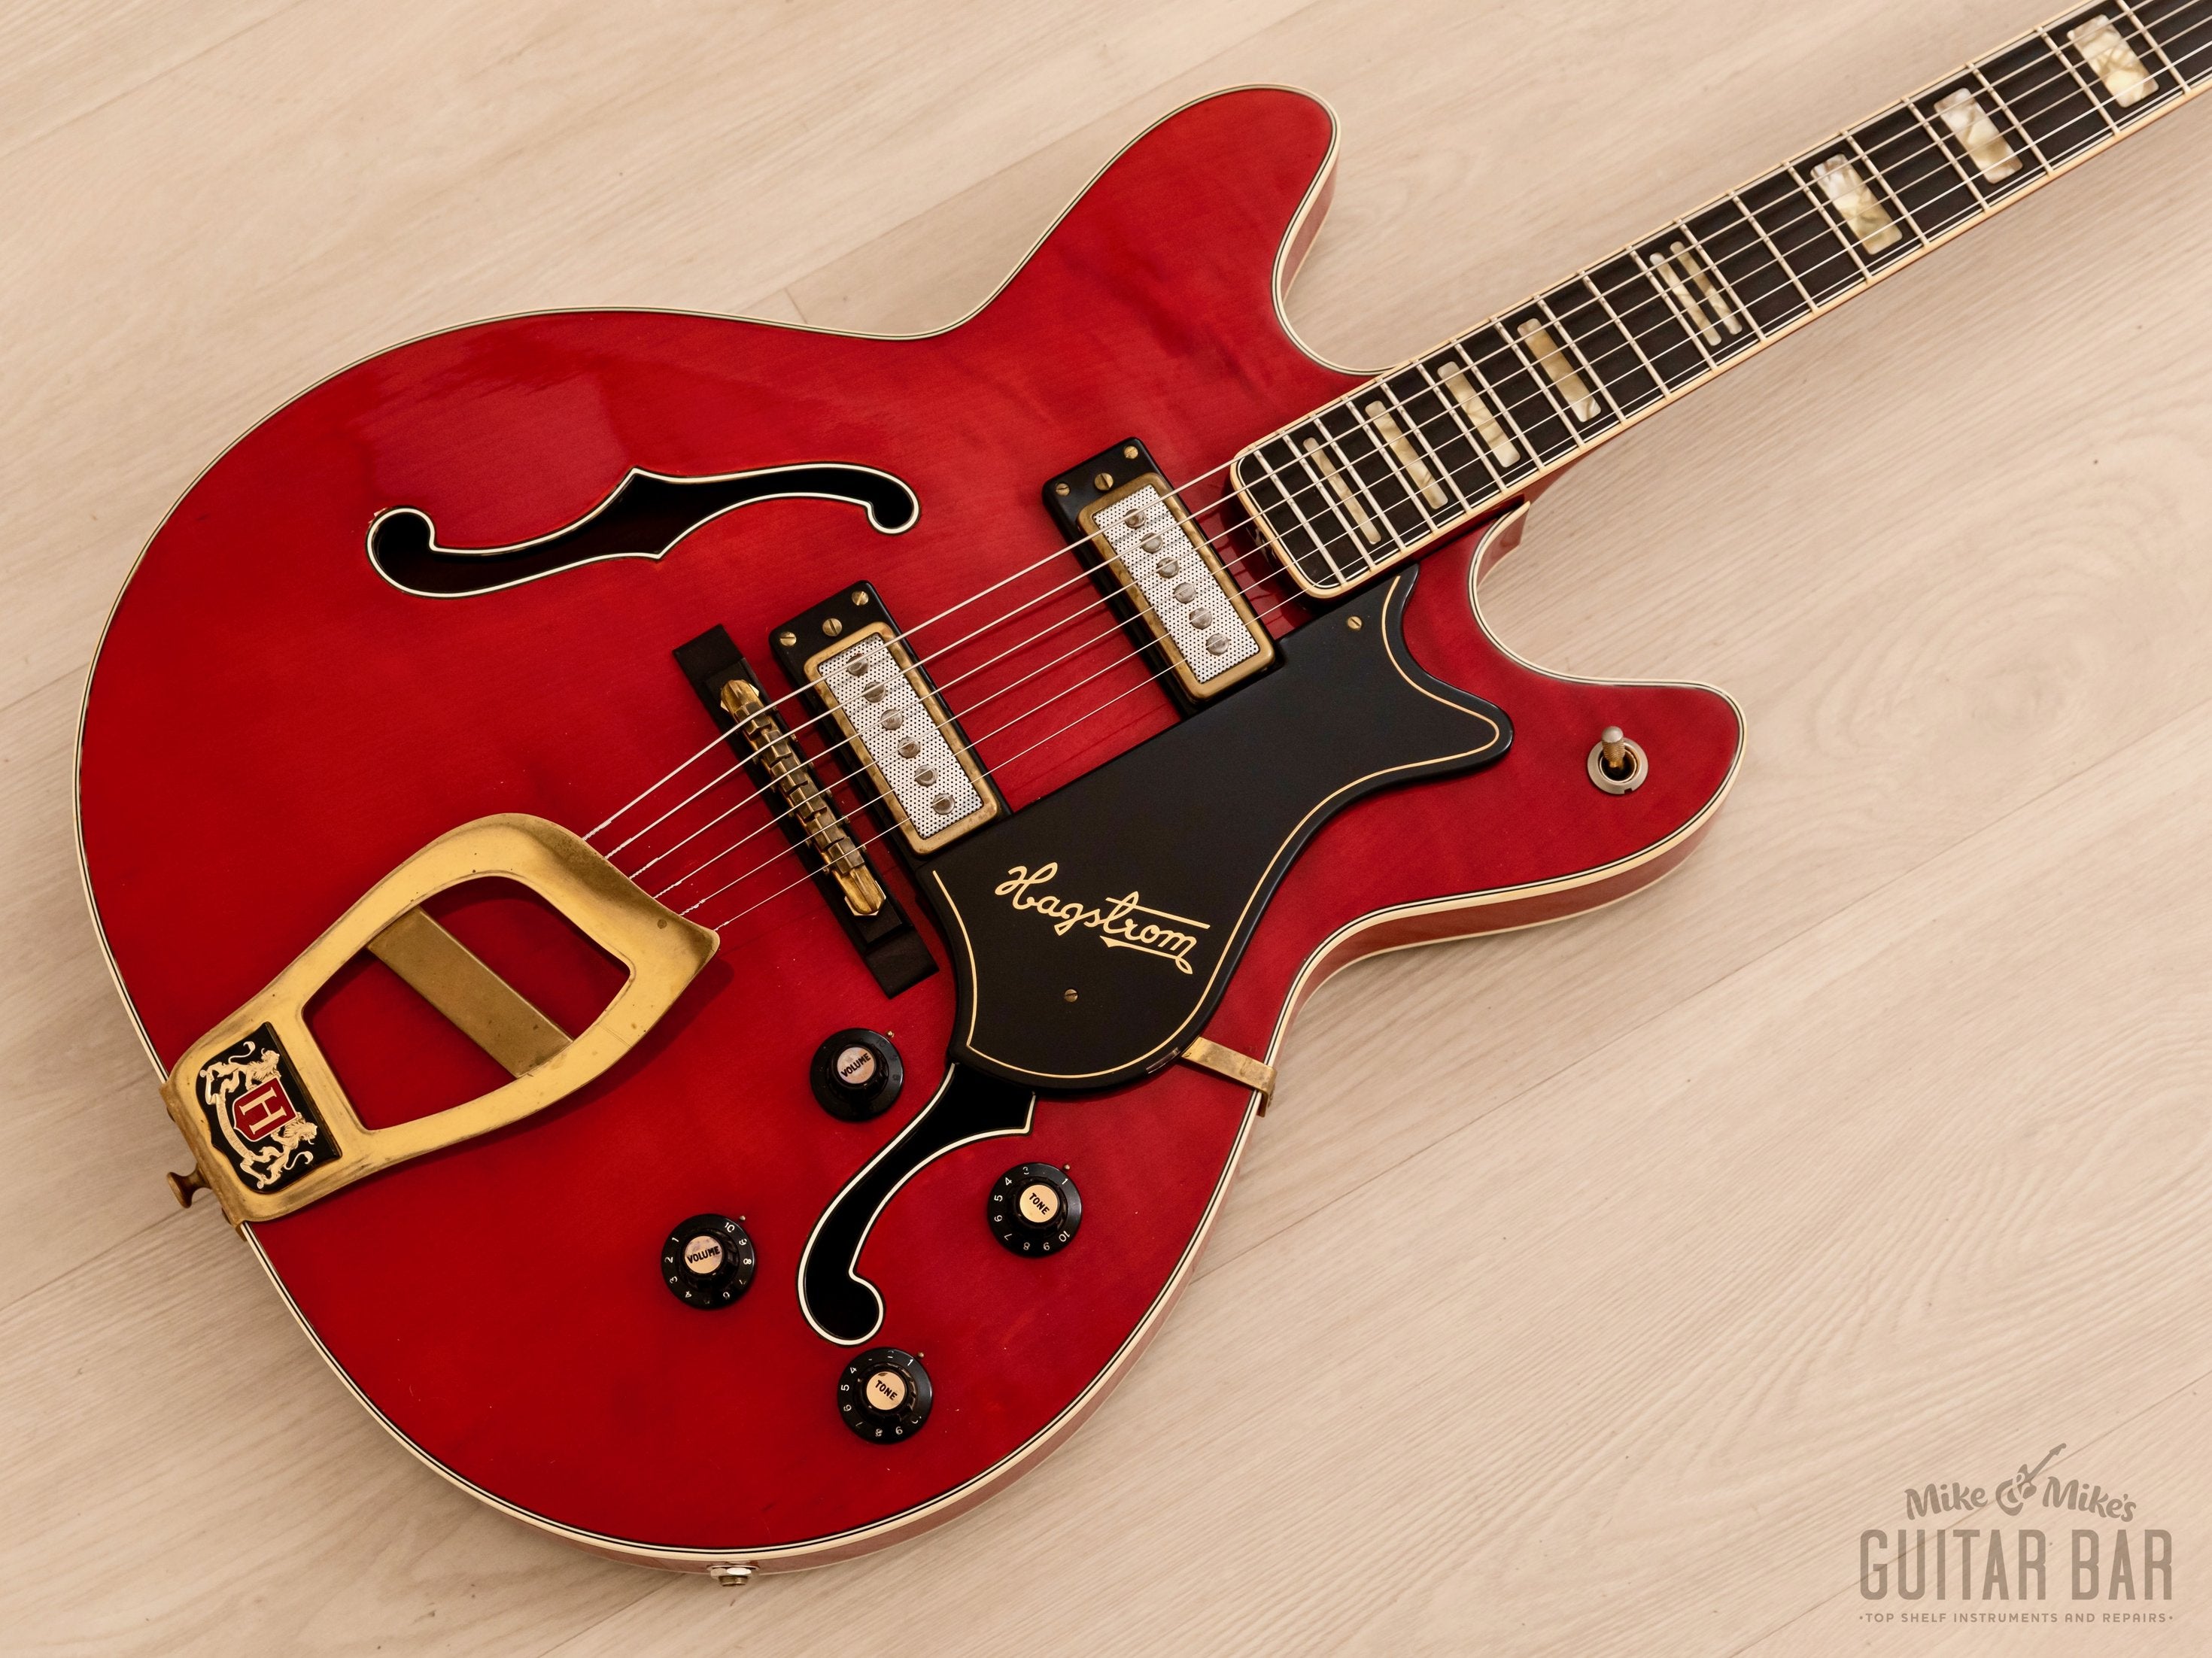 1968 Hagstrom Viking Deluxe V2 Vintage Hollowbody Cherry Red w/ Case, Elvis Comeback Special